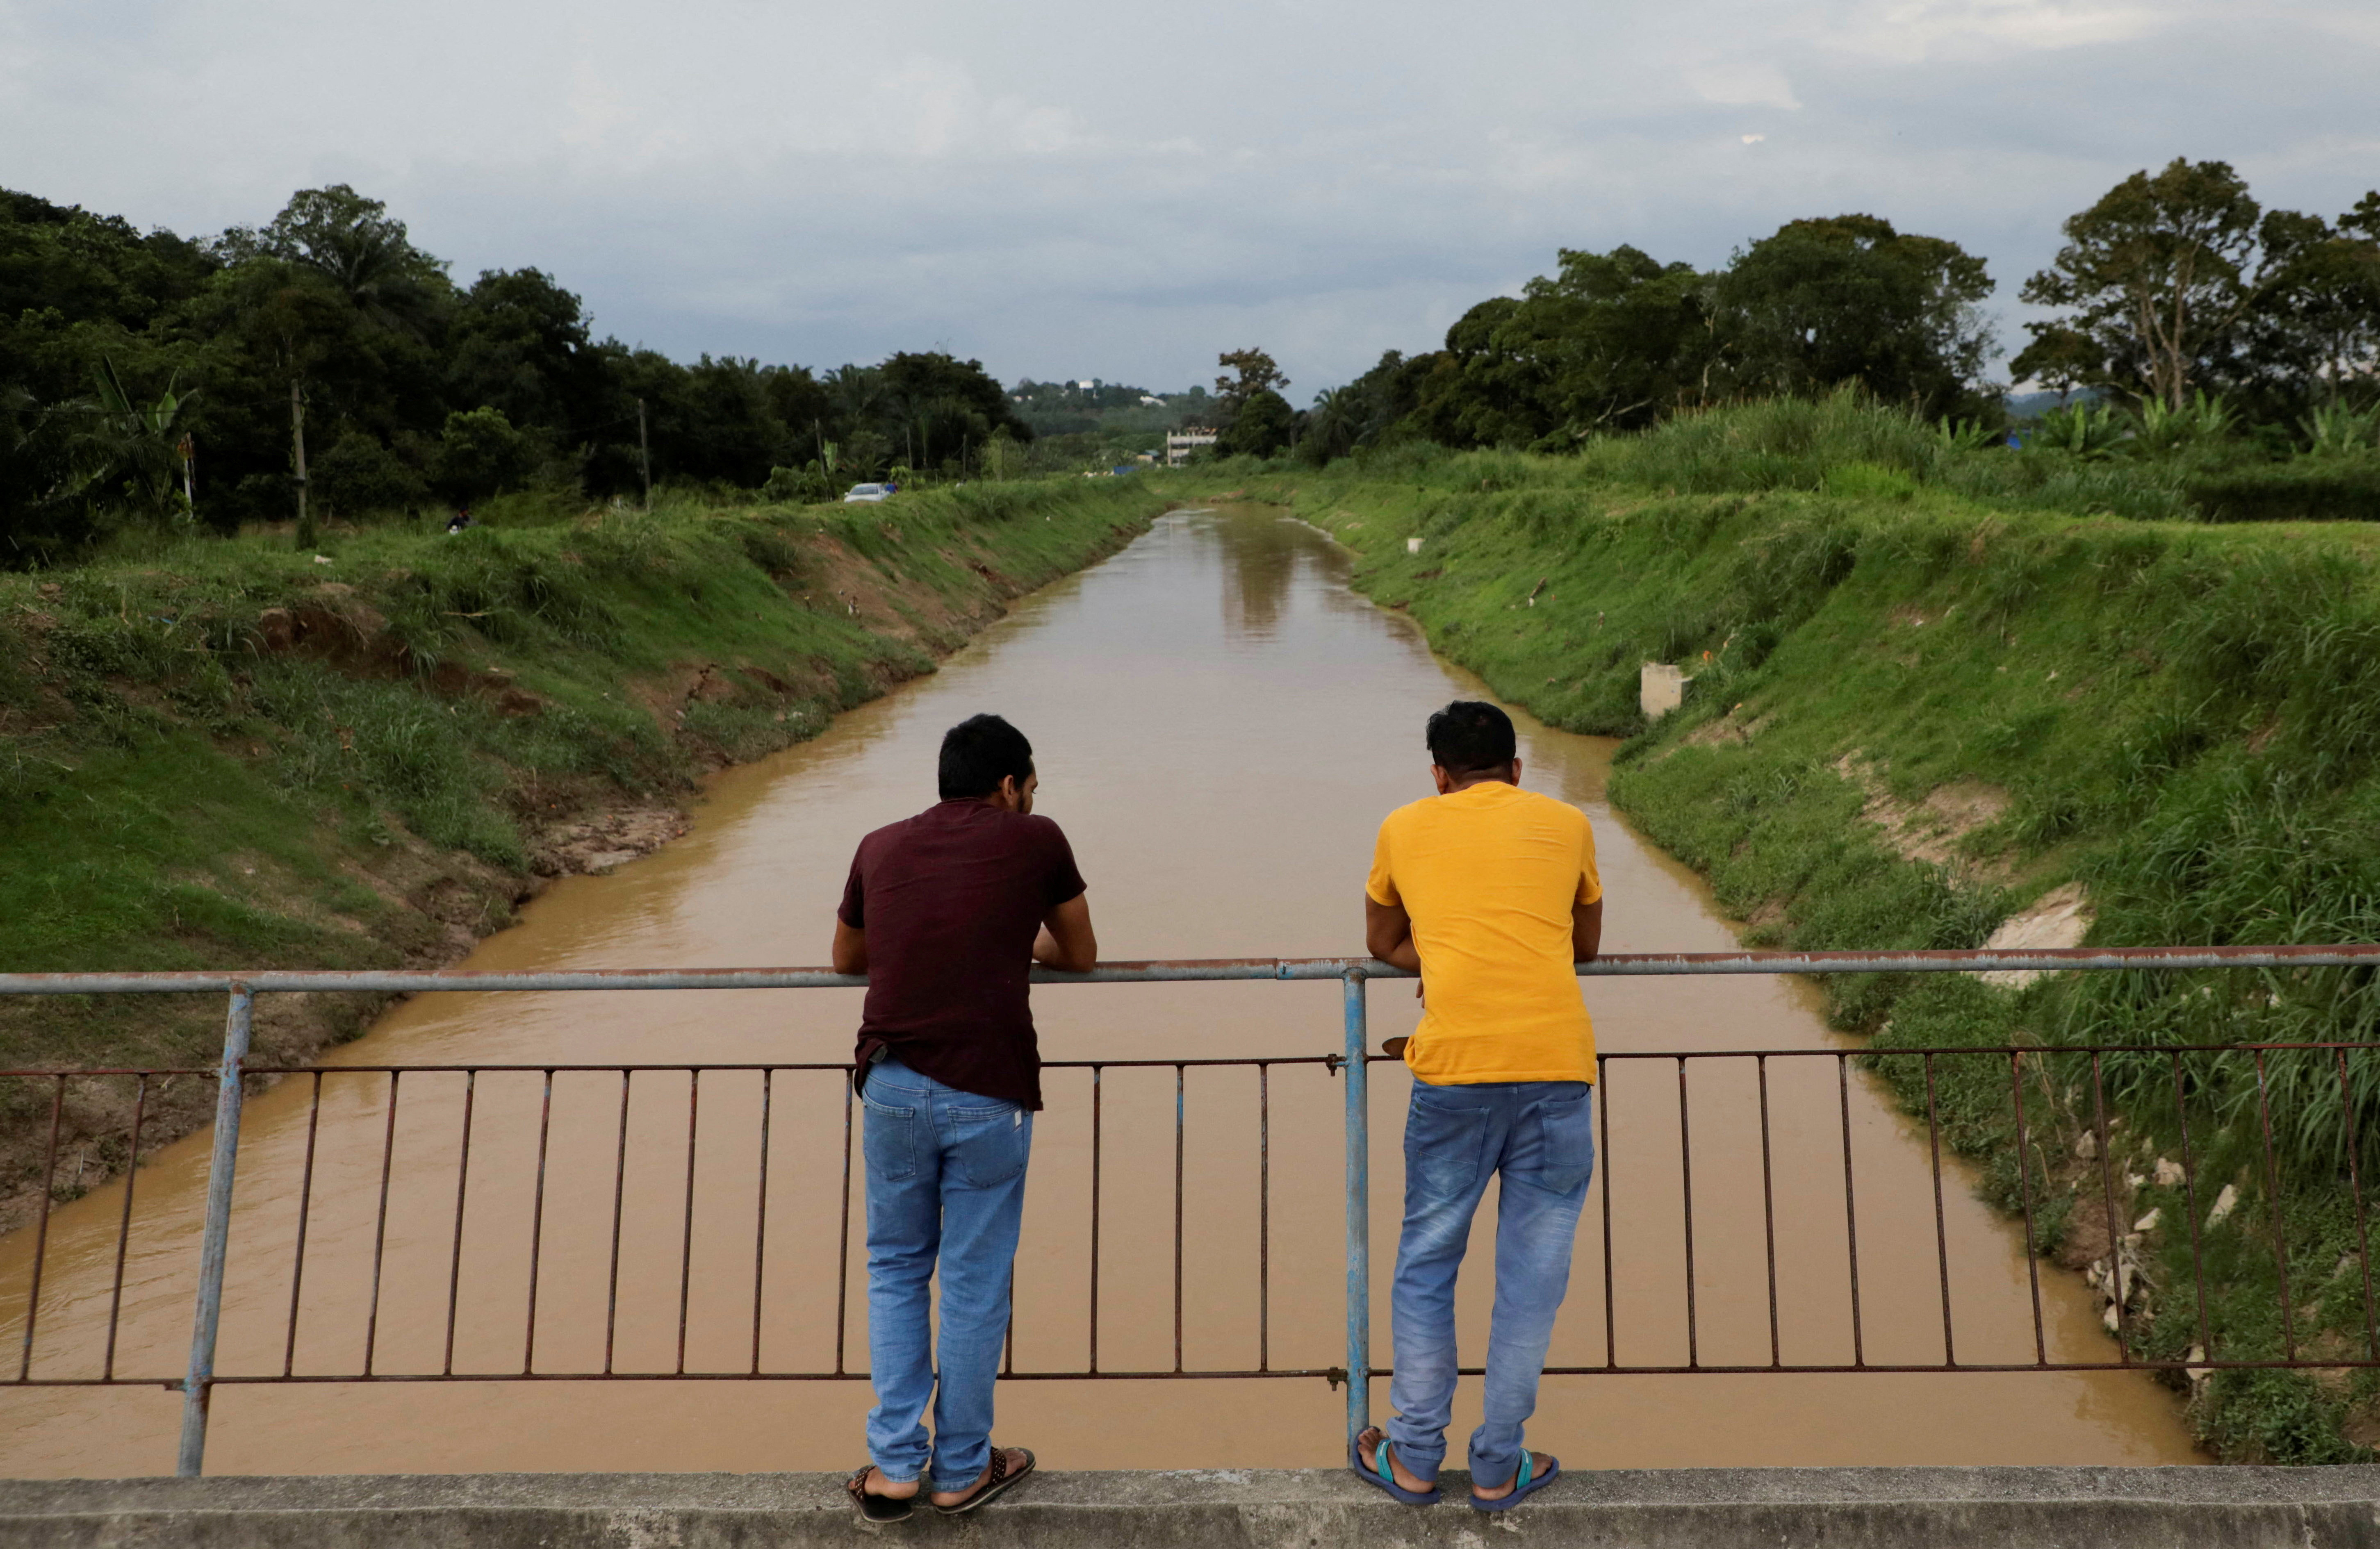 South Asian migrant workers stand on a bridge in Sepang